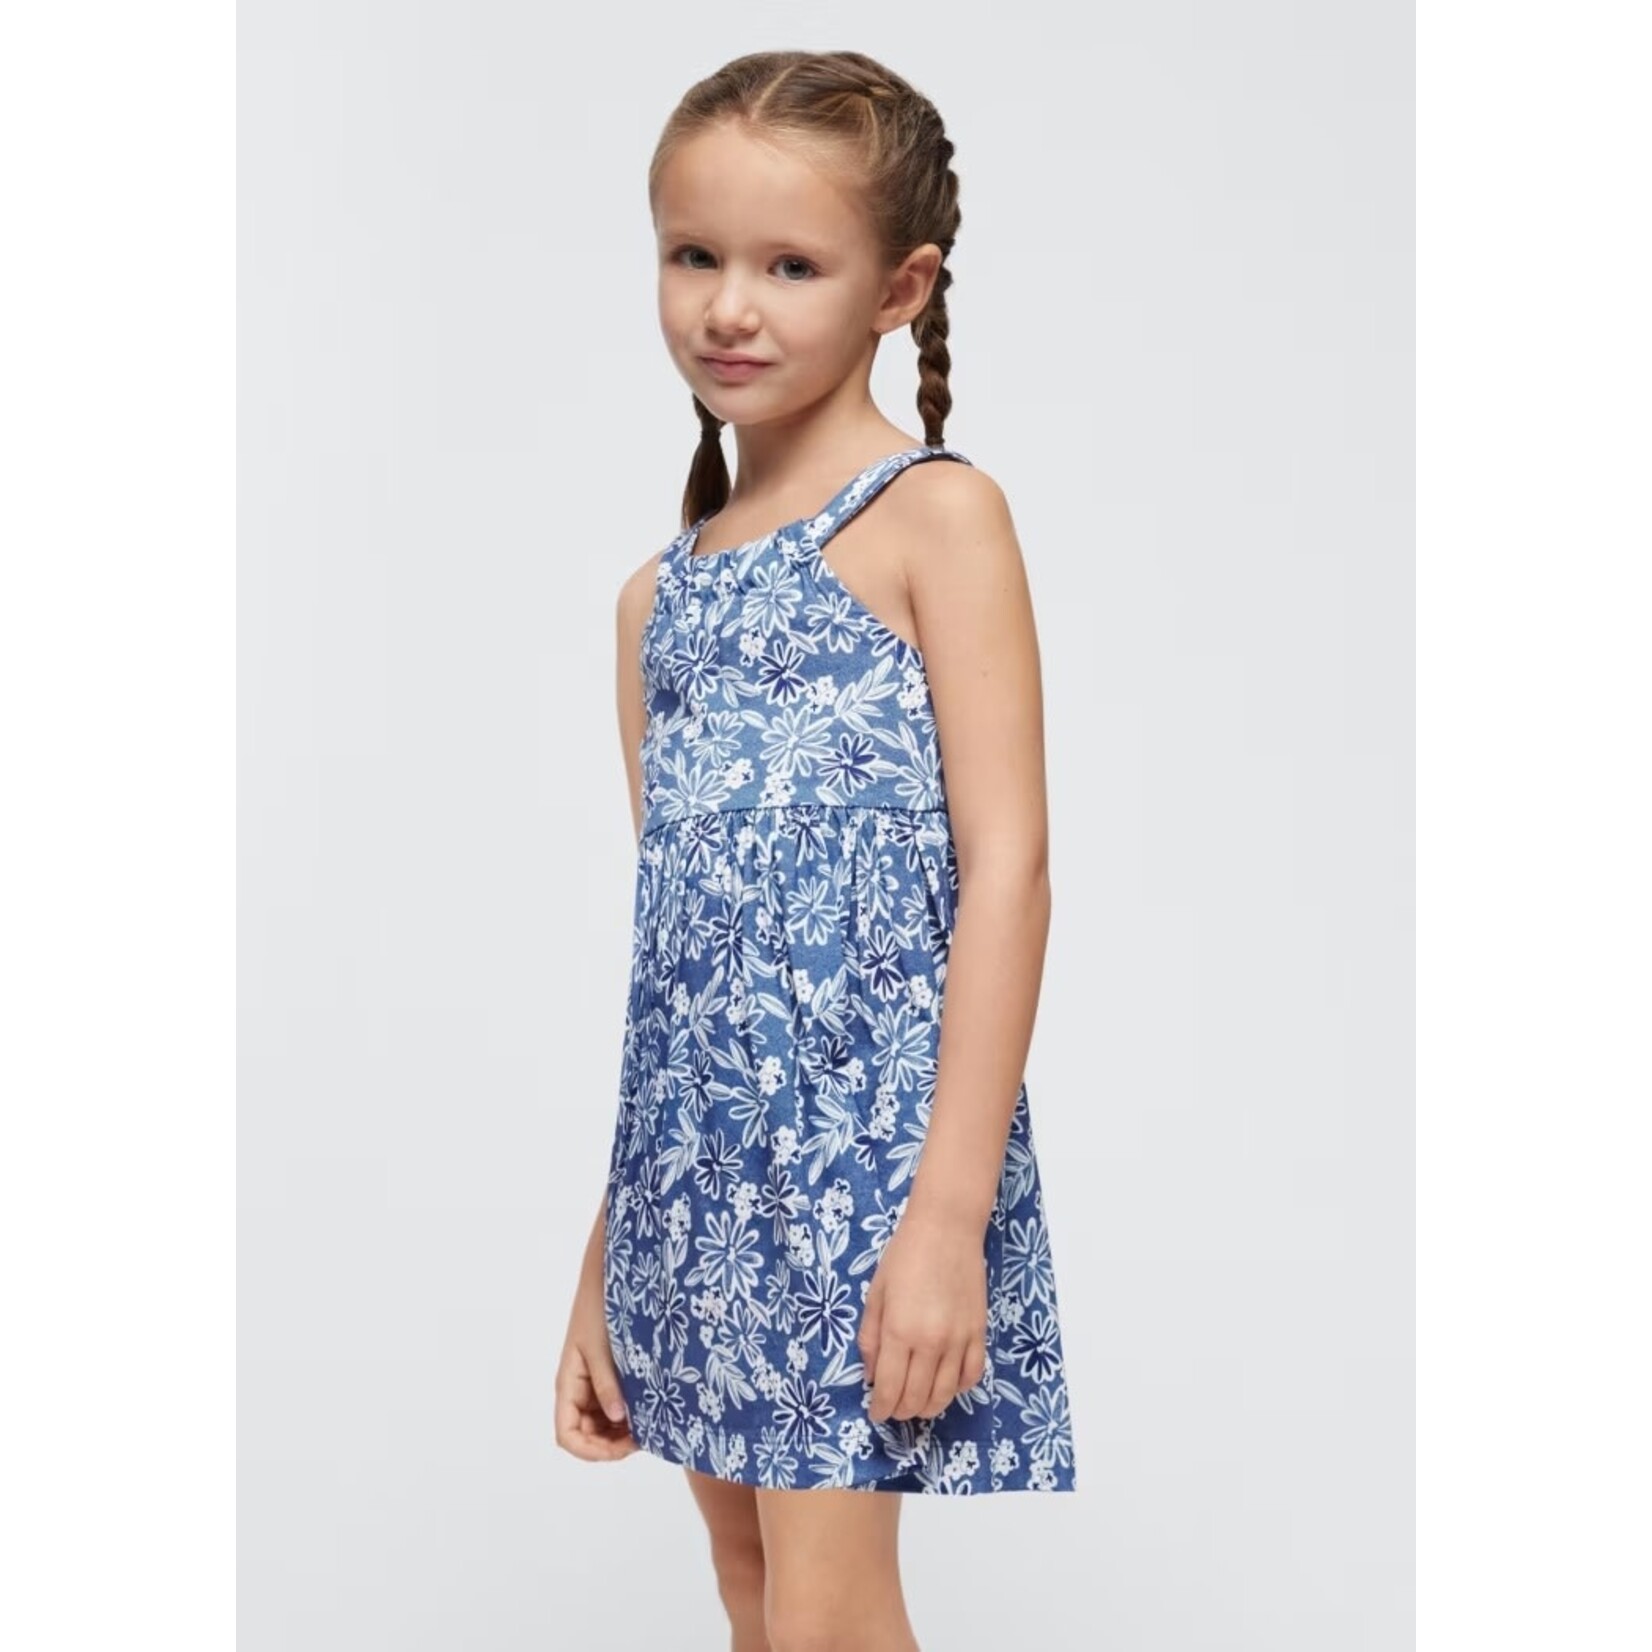 Mayoral MAYORAL - Blue sleeveless dress with allover white flower print